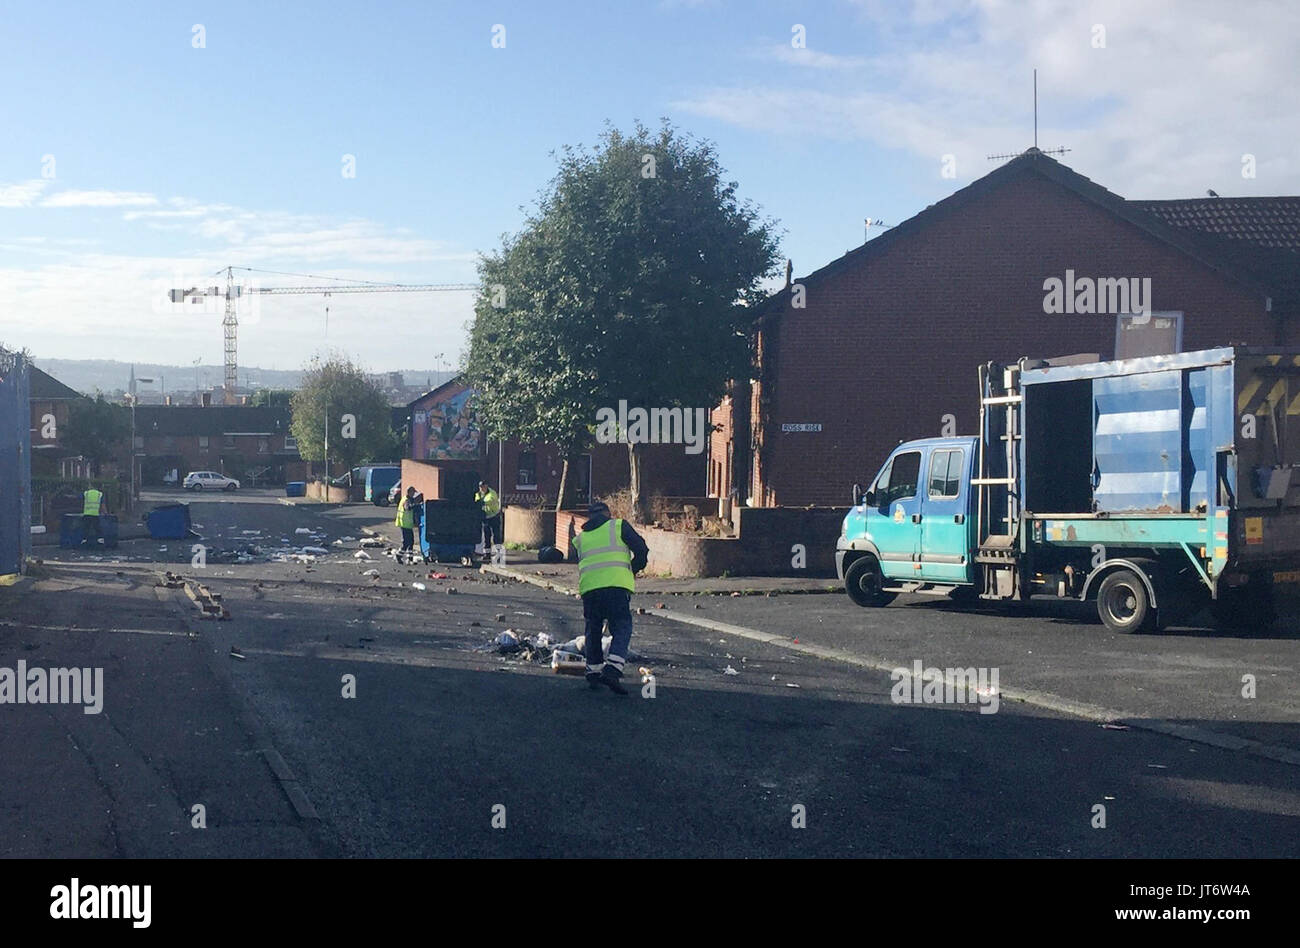 RETRANSMITTED CHANGING LOCATION FROM MARKETS AREA TO DIVIS AREA Cleaning up begins in the Divis area of Belfast, where Police have been attacked and cars torched by masked youths apparently angered by the removal of wood from the site of a nationalist bonfire in Belfast. Stock Photo